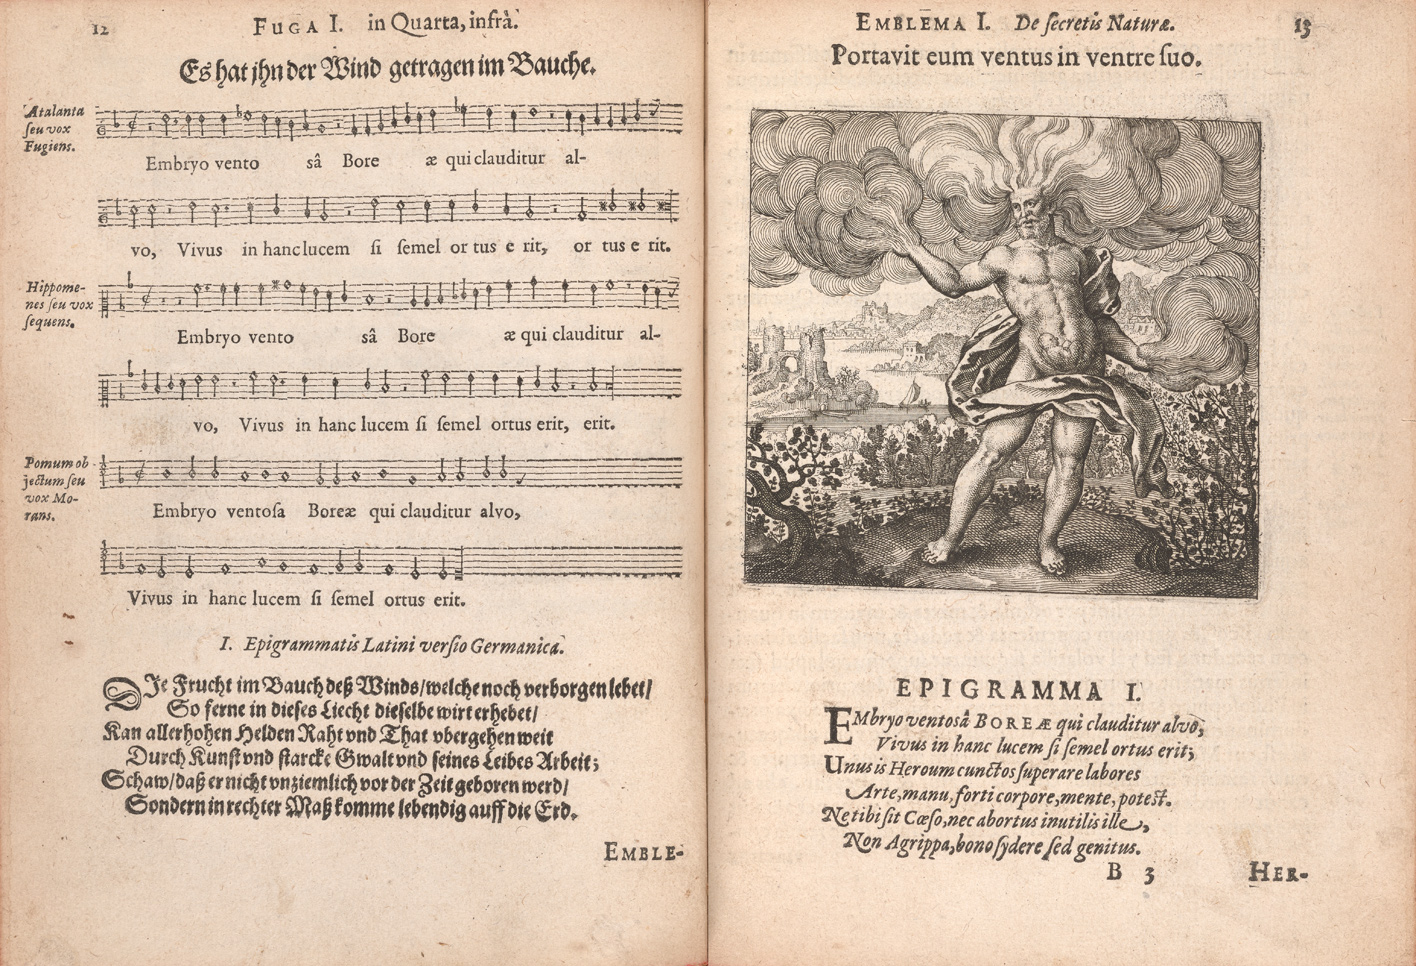 A two-page spread of emblem 1 from Atalanta fugiens consists of musical notation and a German translation of the epigram on the left-hand page and a Latin motto, etching, and Latin version of the epigram on the right-hand side. In the emblem, a bearded nude man, identified as Boreas, with wind gusts extending from his head and arms, has a fetus inside his stomach. He is standing amongst bushes with a river and cityscape in the background.